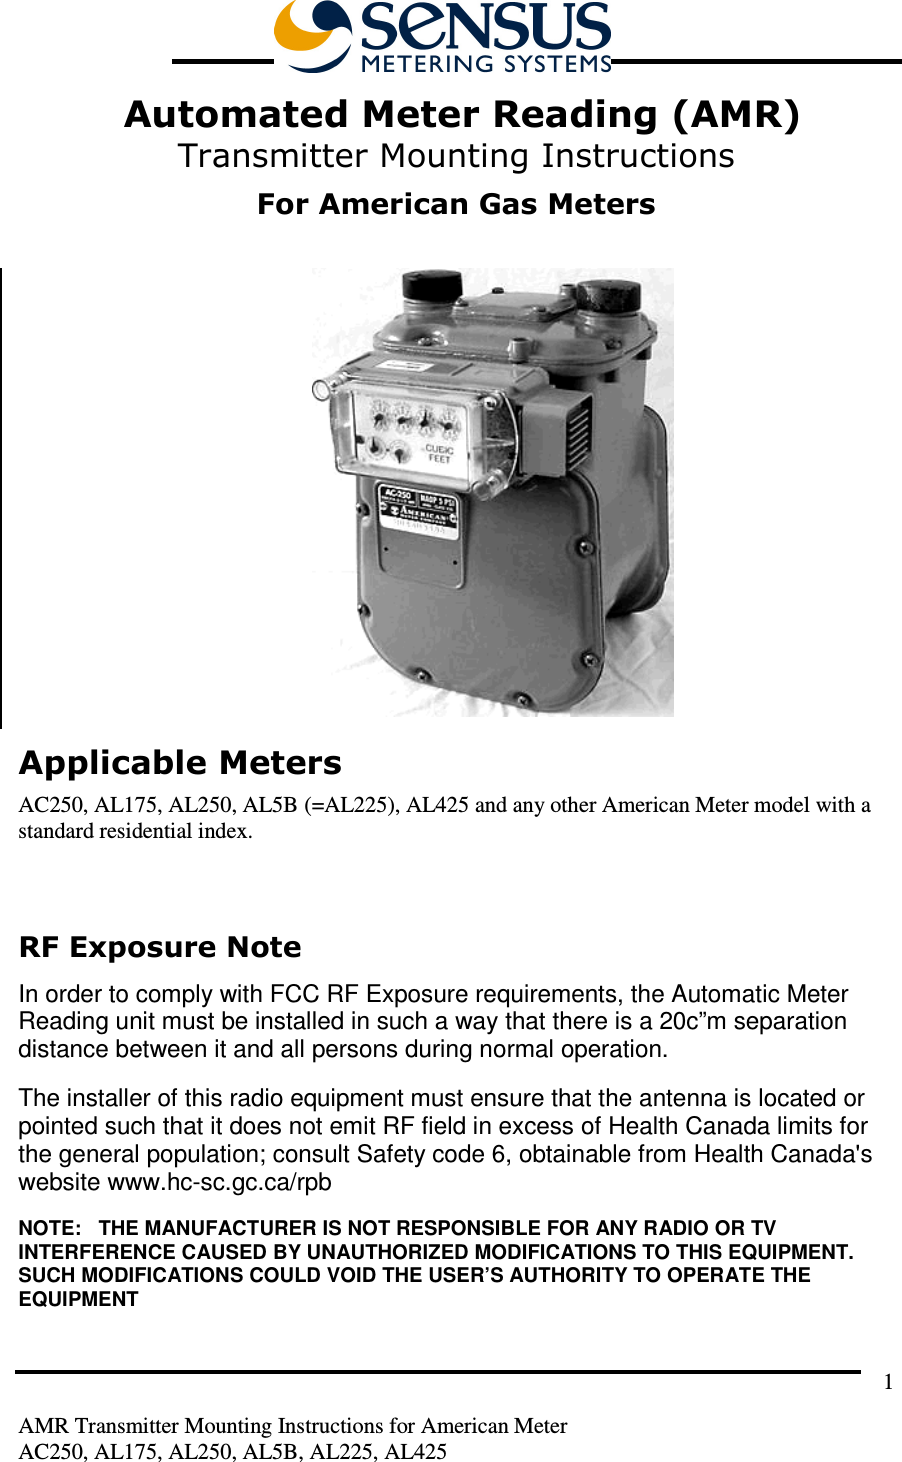         AMR Transmitter Mounting Instructions for American Meter AC250, AL175, AL250, AL5B, AL225, AL425 1  Automated Meter Reading (AMR) Transmitter Mounting Instructions  For American Gas Meters   Applicable Meters AC250, AL175, AL250, AL5B (=AL225), AL425 and any other American Meter model with a standard residential index.  RF Exposure Note  In order to comply with FCC RF Exposure requirements, the Automatic Meter Reading unit must be installed in such a way that there is a 20c”m separation distance between it and all persons during normal operation. The installer of this radio equipment must ensure that the antenna is located or pointed such that it does not emit RF field in excess of Health Canada limits for the general population; consult Safety code 6, obtainable from Health Canada&apos;s website www.hc-sc.gc.ca/rpb NOTE:   THE MANUFACTURER IS NOT RESPONSIBLE FOR ANY RADIO OR TV INTERFERENCE CAUSED BY UNAUTHORIZED MODIFICATIONS TO THIS EQUIPMENT.  SUCH MODIFICATIONS COULD VOID THE USER’S AUTHORITY TO OPERATE THE EQUIPMENT 